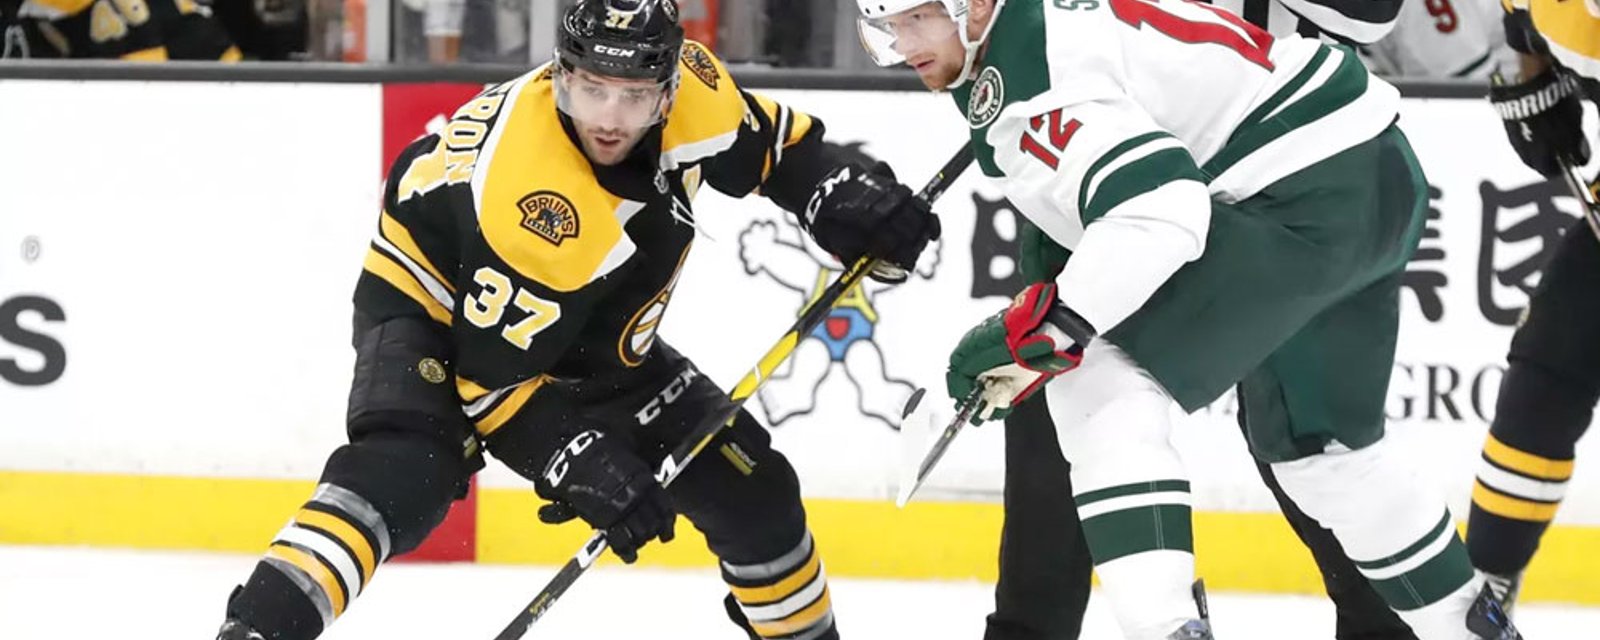 Bergeron injured again, will miss time says Bruins' coach